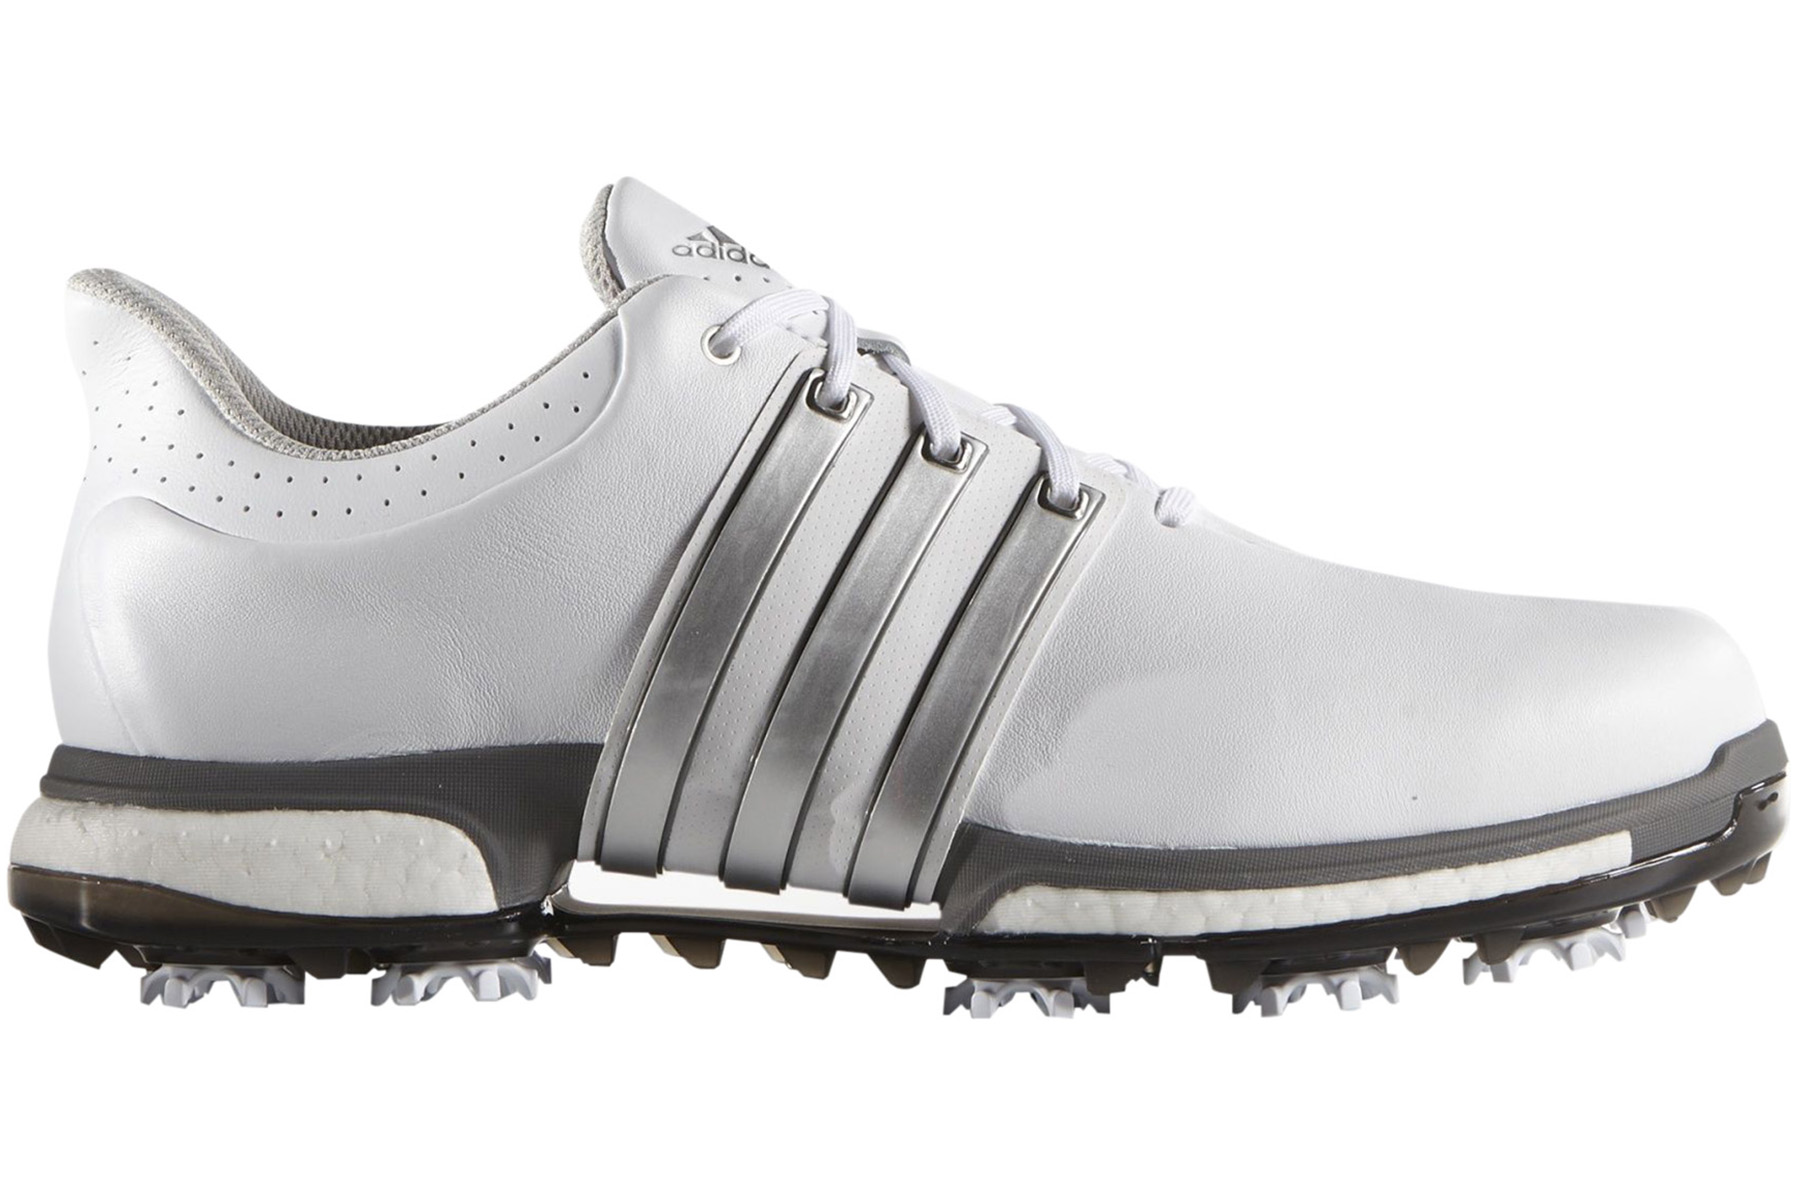 adidas Golf Tour 360 Boost Shoes from american golf